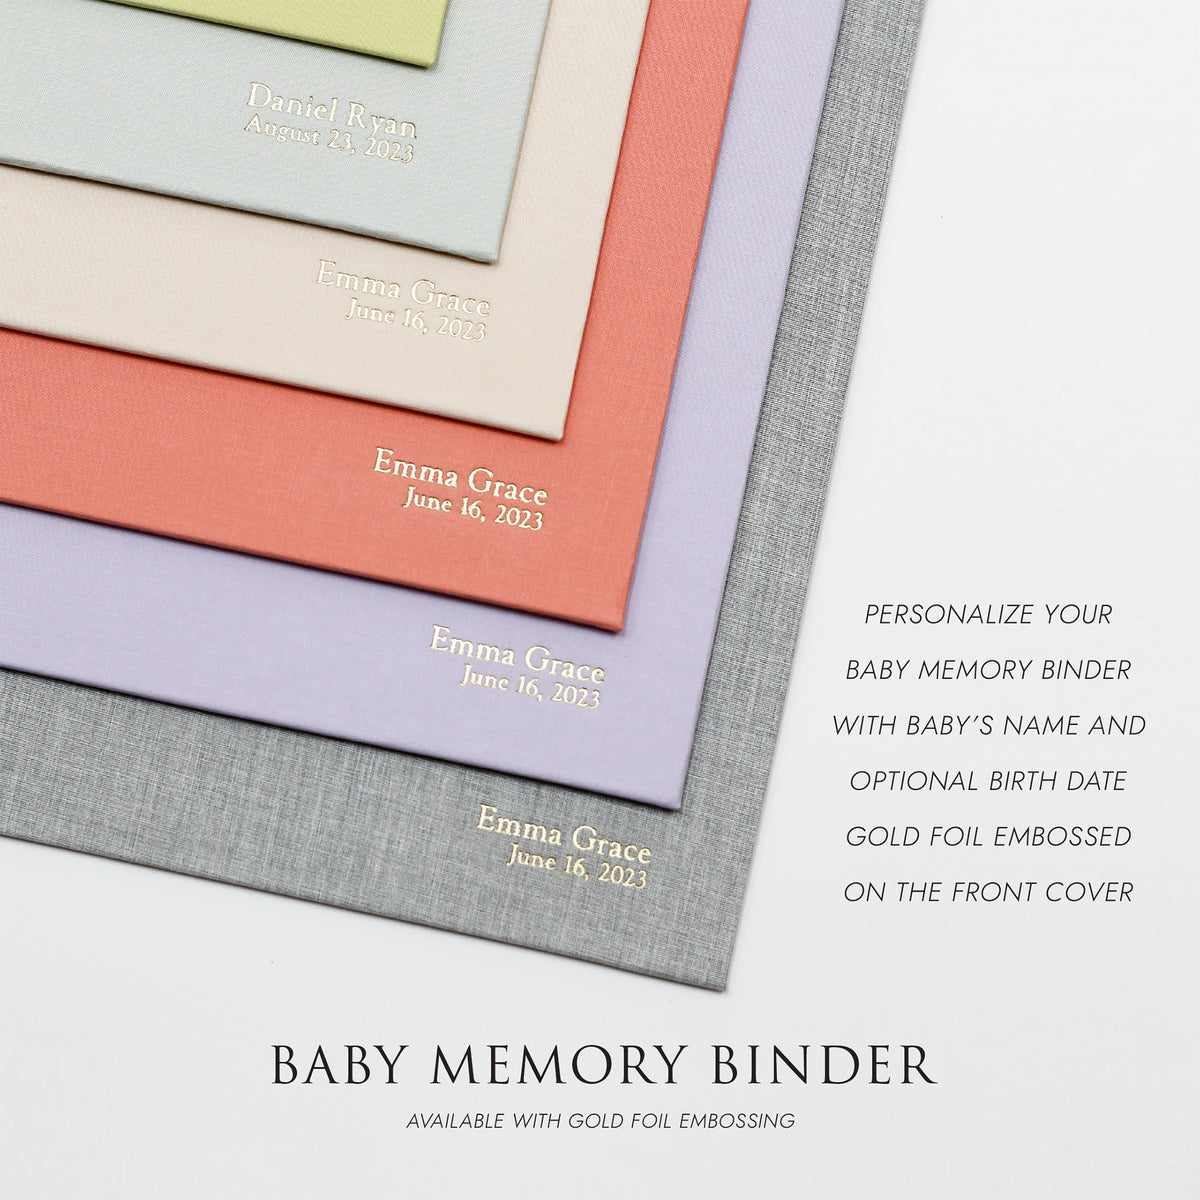 Personalized Baby Memory Binder with Natural Linen Cover | Select Your Own Pages